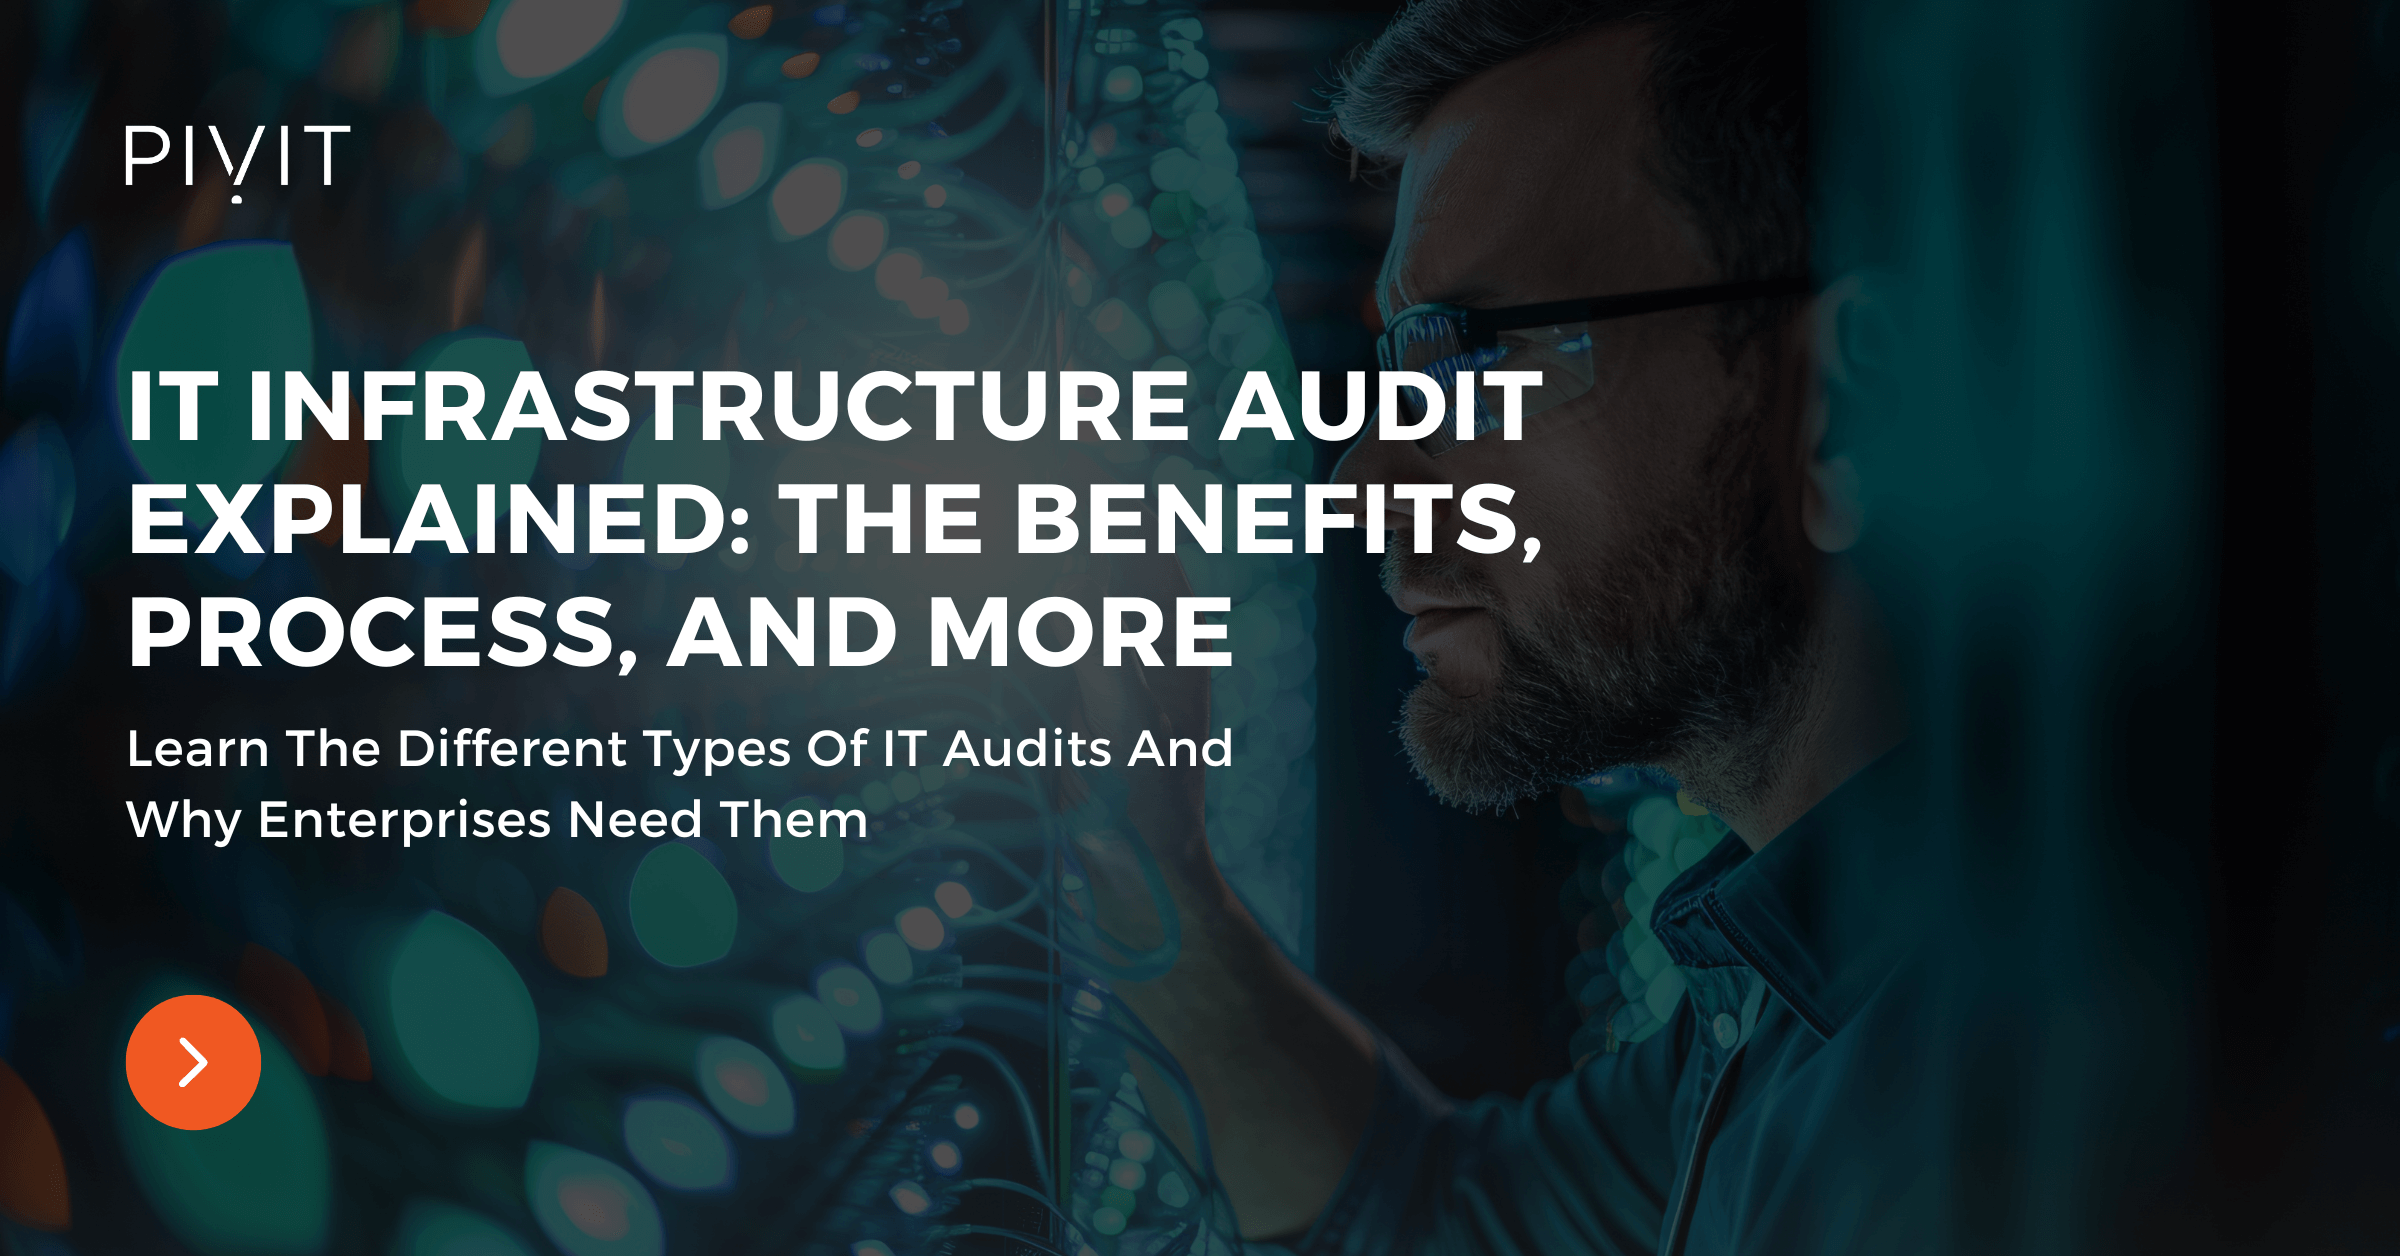 Learn The Different Types Of IT Audits And Why Enterprises Need Them - IT Infrastructure Audit Explained: The Benefits, Process, And More